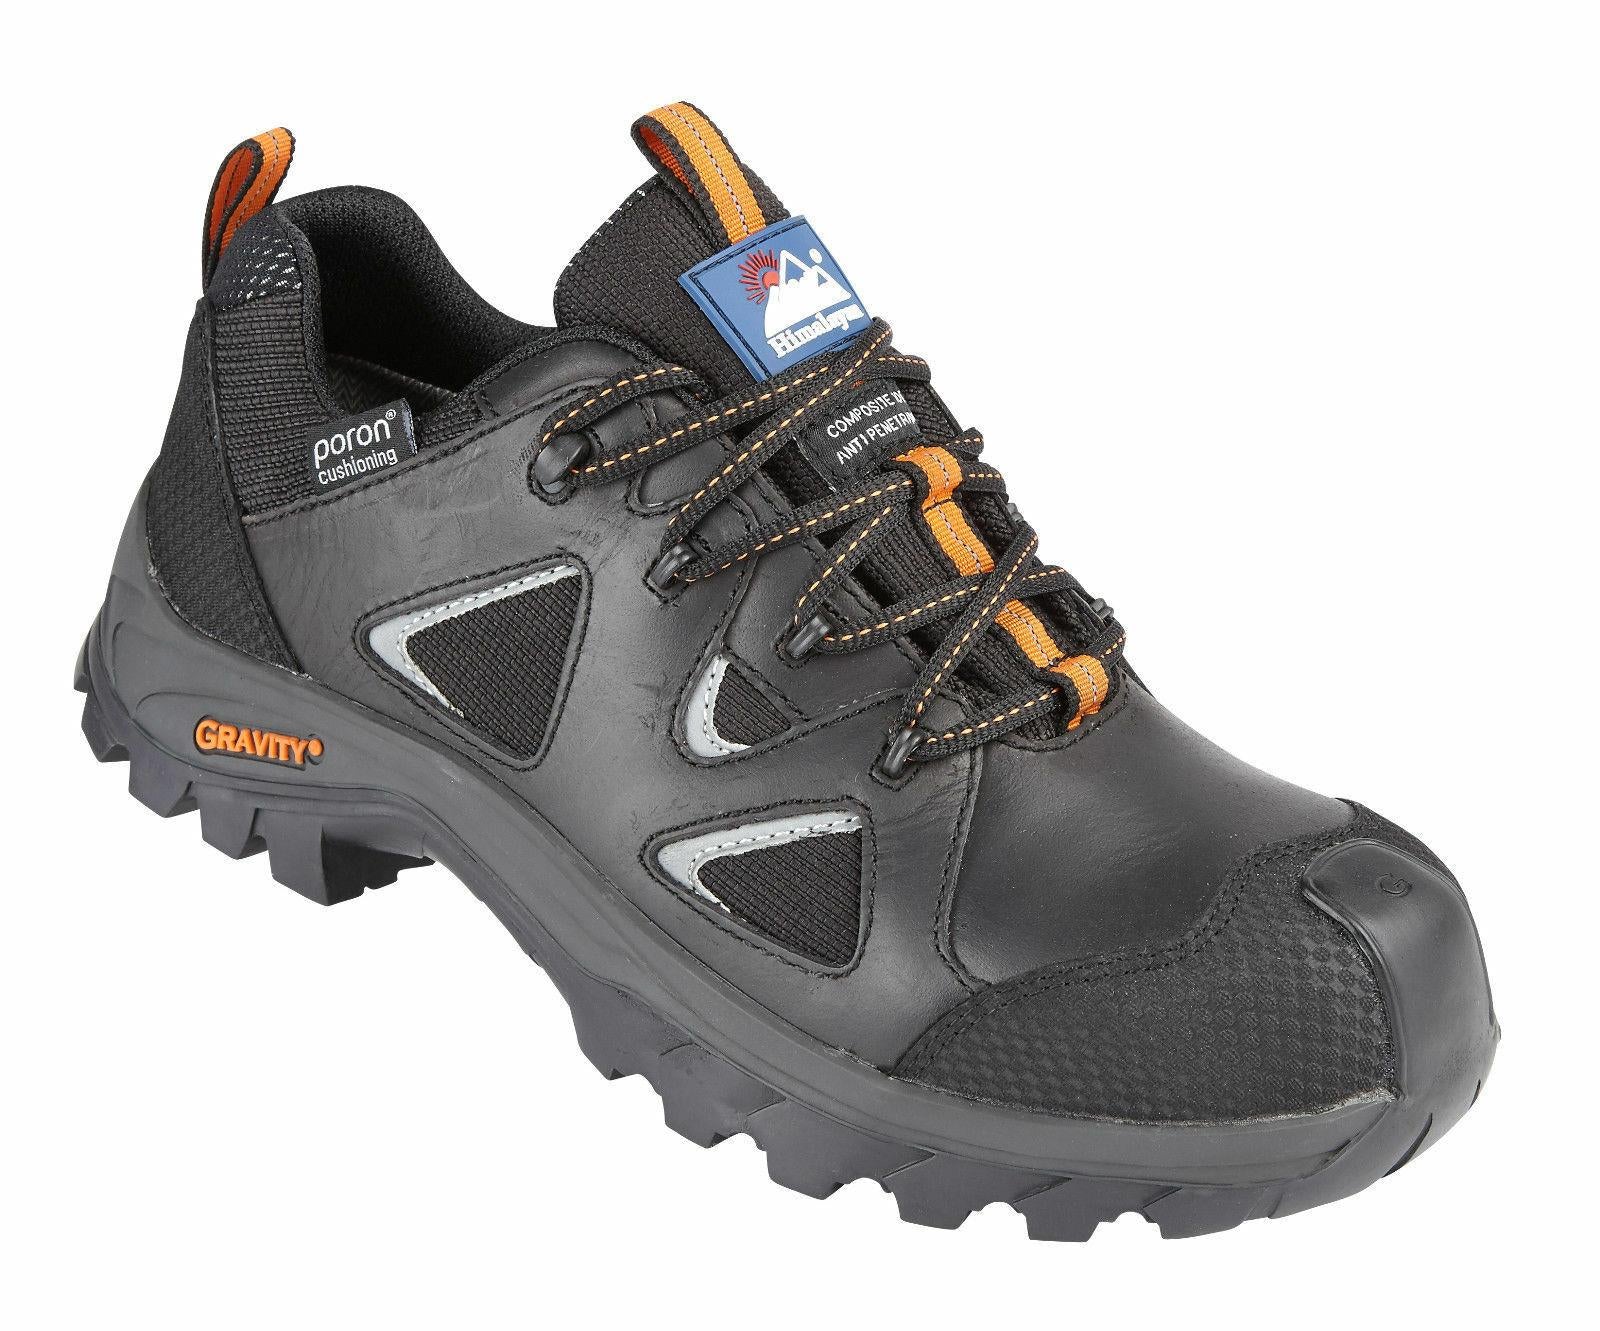 Himalayan Gravity TRXII S3 waterproof composite toe/midsole safety trainer #4120